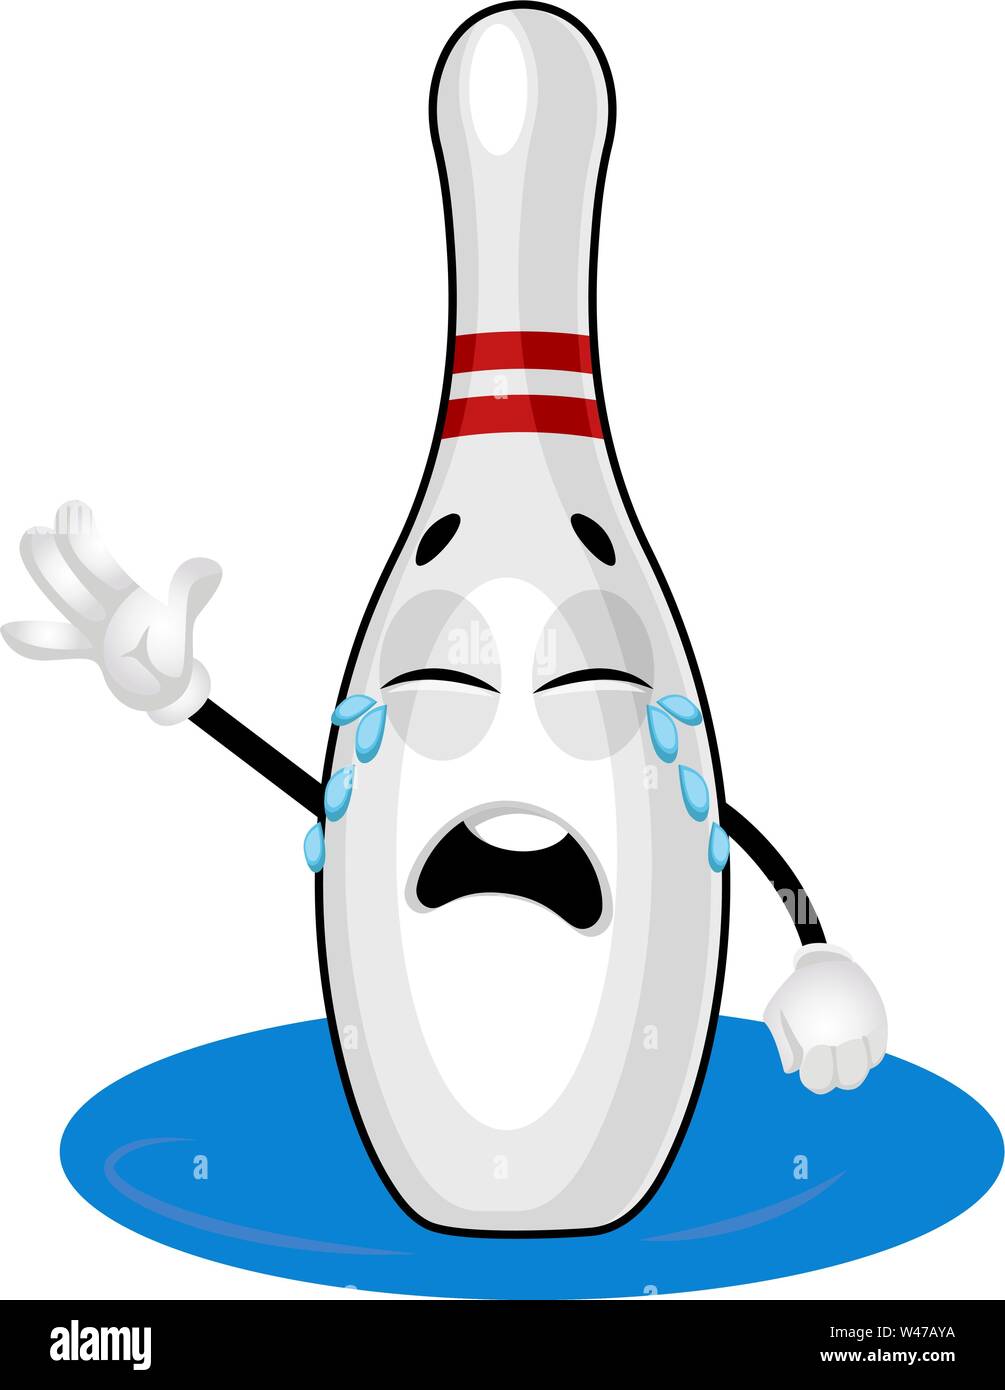 Bowling pin crying, illustration, vector on white background. Stock Vector